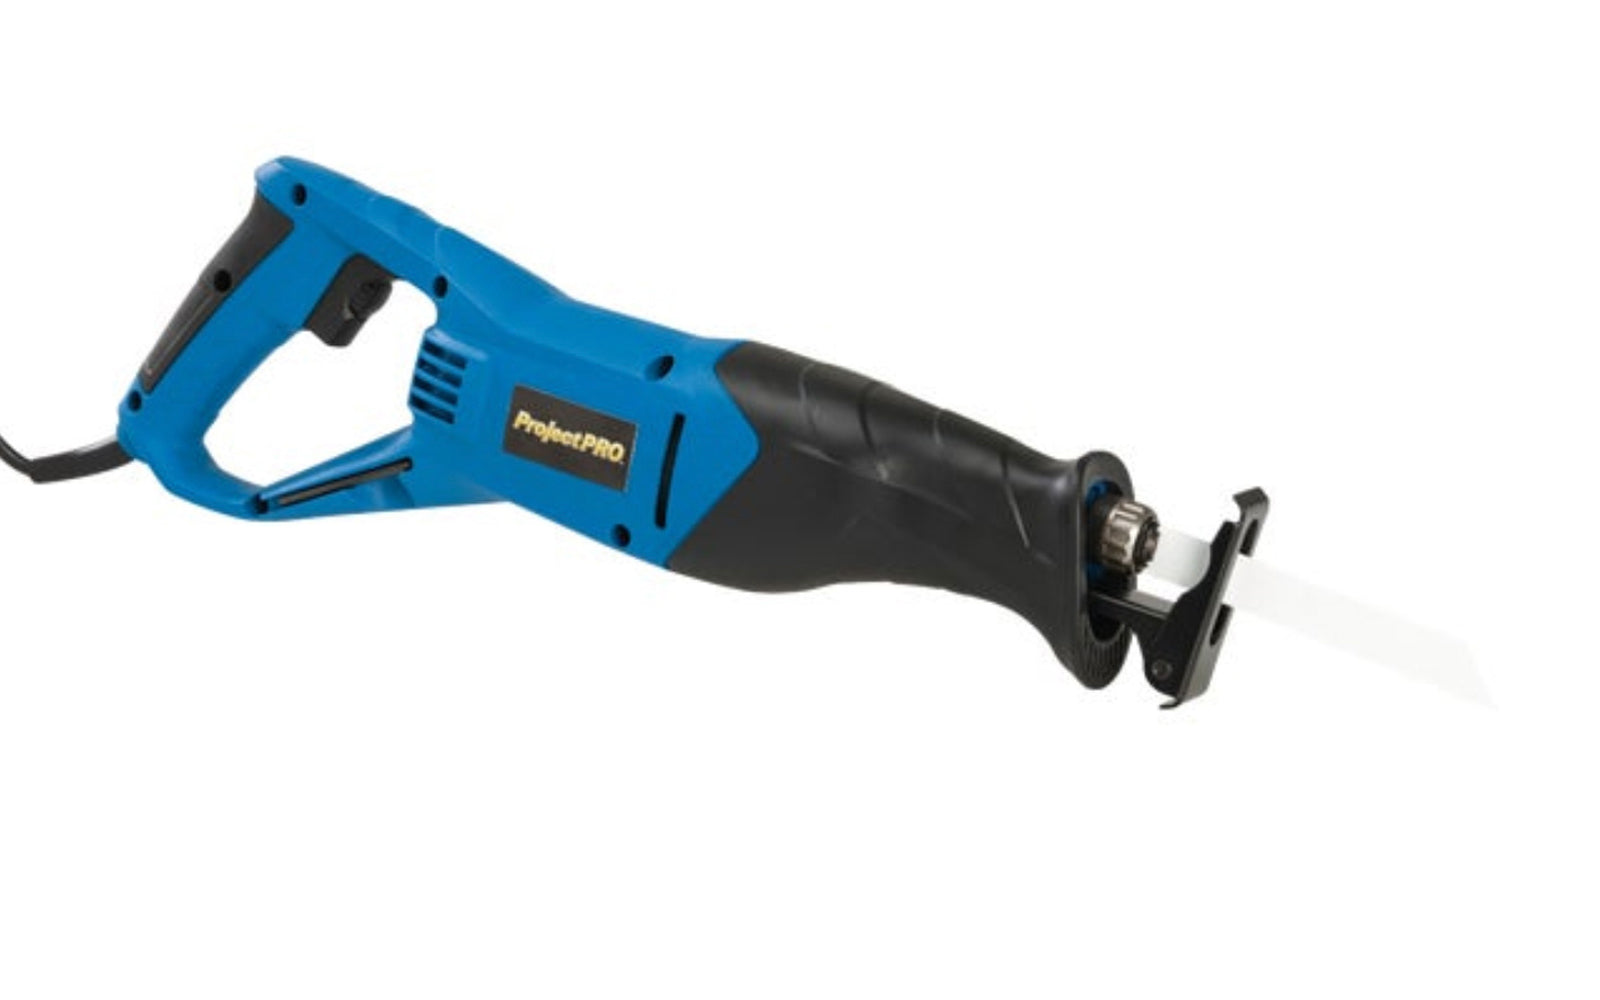 Project-Pro 7-Amp Reciprocating Saw. Economy priced reciprocating saw power tool, ideal for DIY. 7A motor to cut through lumber, metal, tree limbs, & a variety of other materials. Stroke length 1-3/16